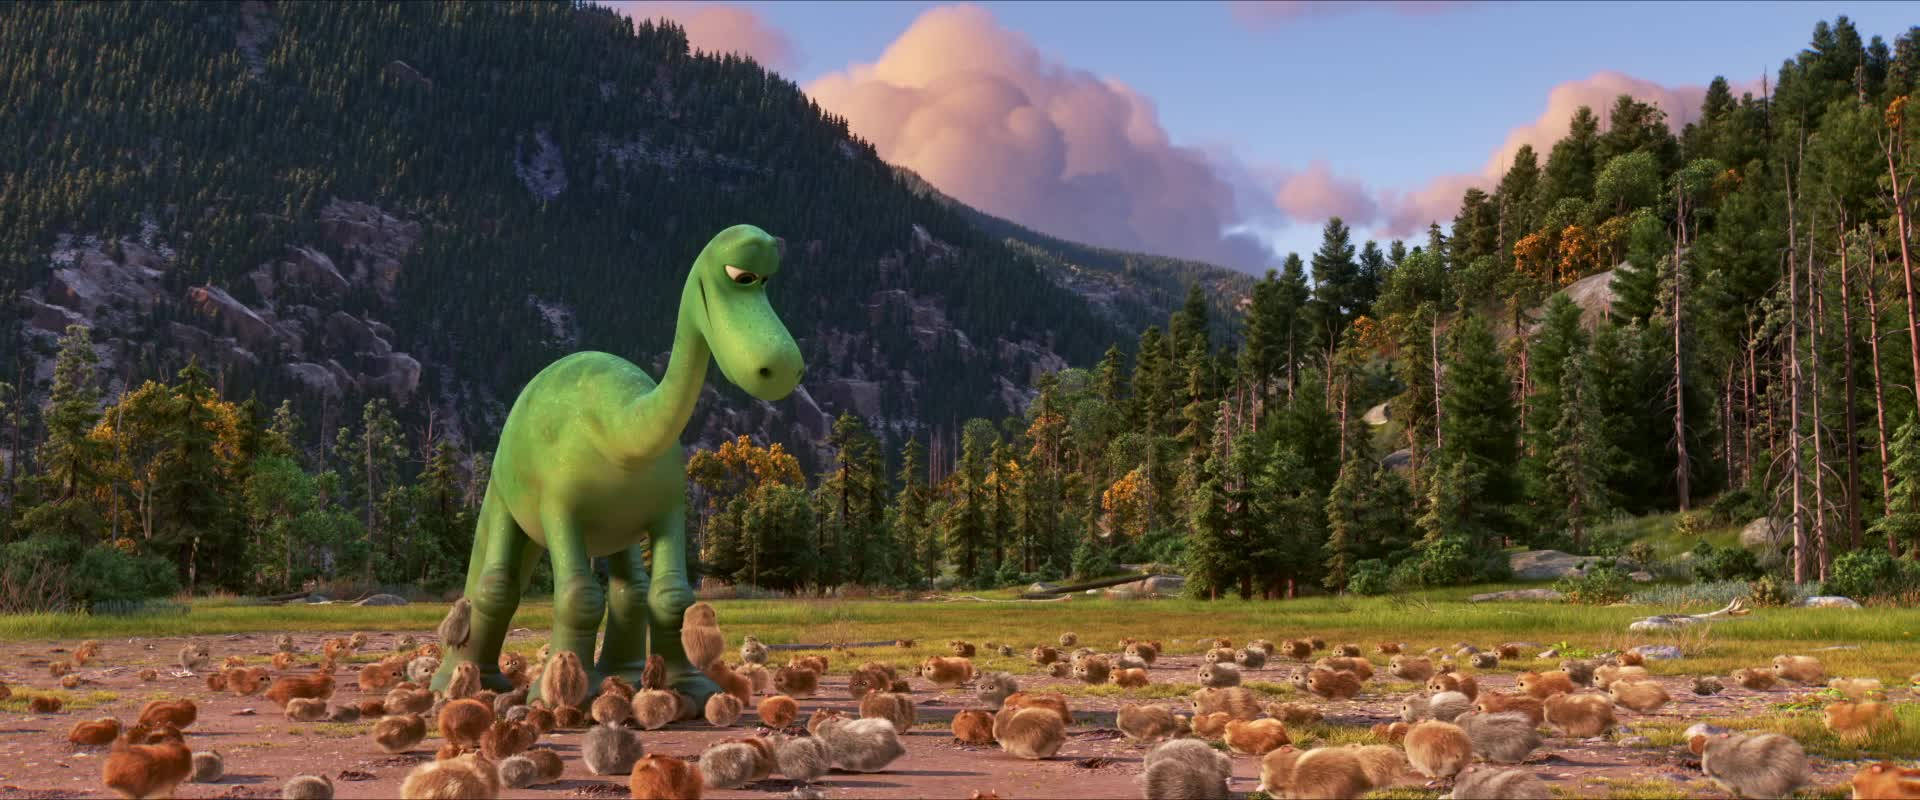 The Good Dinosaur With Squirrels Background